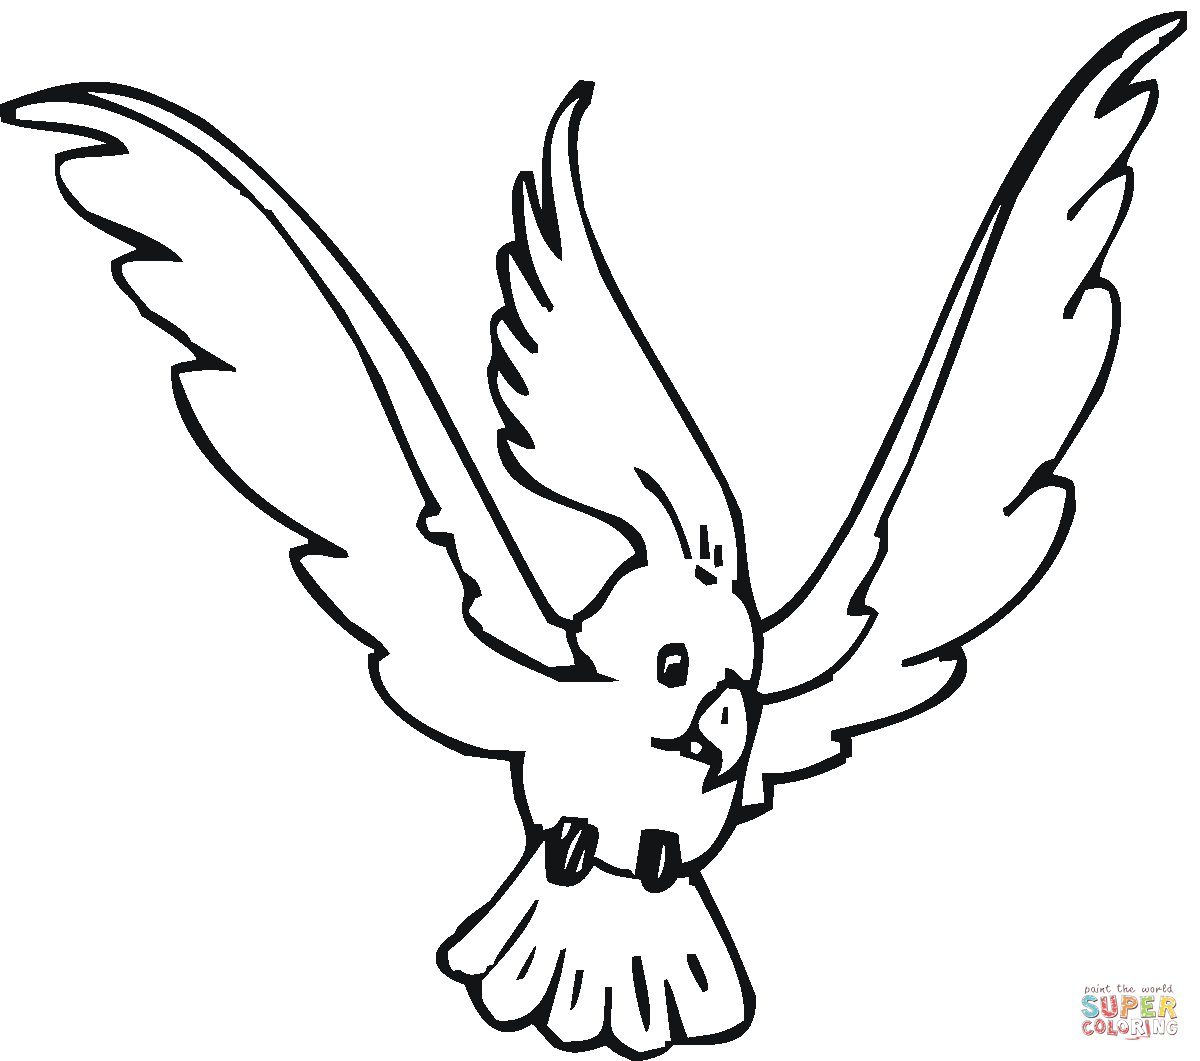 Major Mitchell's Cockatoo coloring #5, Download drawings